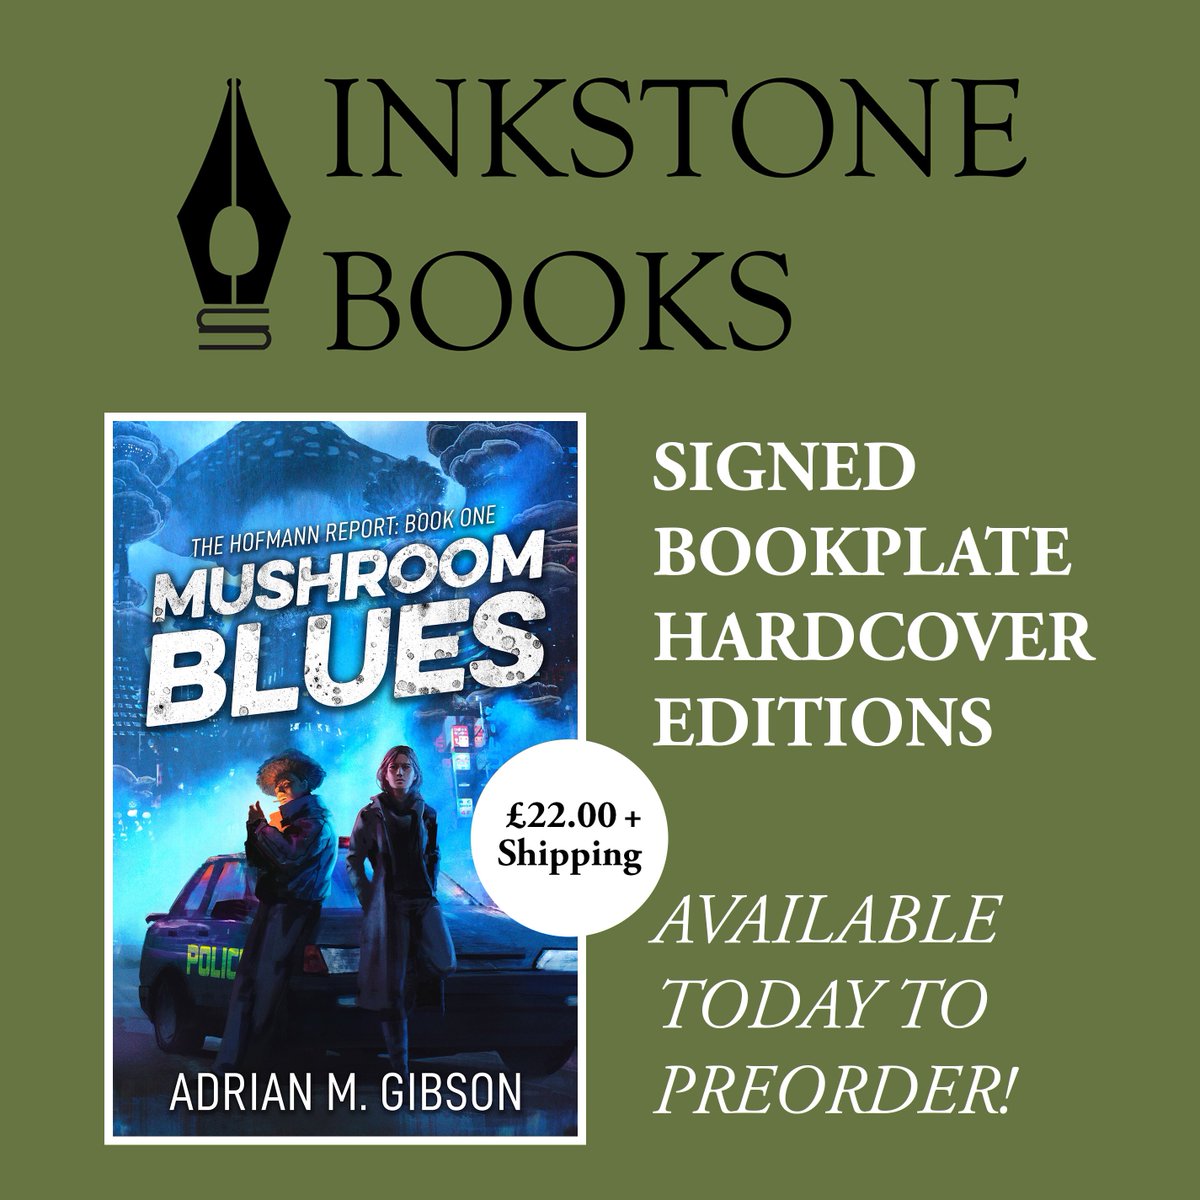 🍄 SIGNED BOOKPLATE HARDCOVERS 🍄
Preorders are now open for #MushroomBlues hardcovers with signed bookplates over on @InkstoneBooks! If you’ve been wanting a signed copy, check out the link below:
inkstonebooks.com/product/mushro…